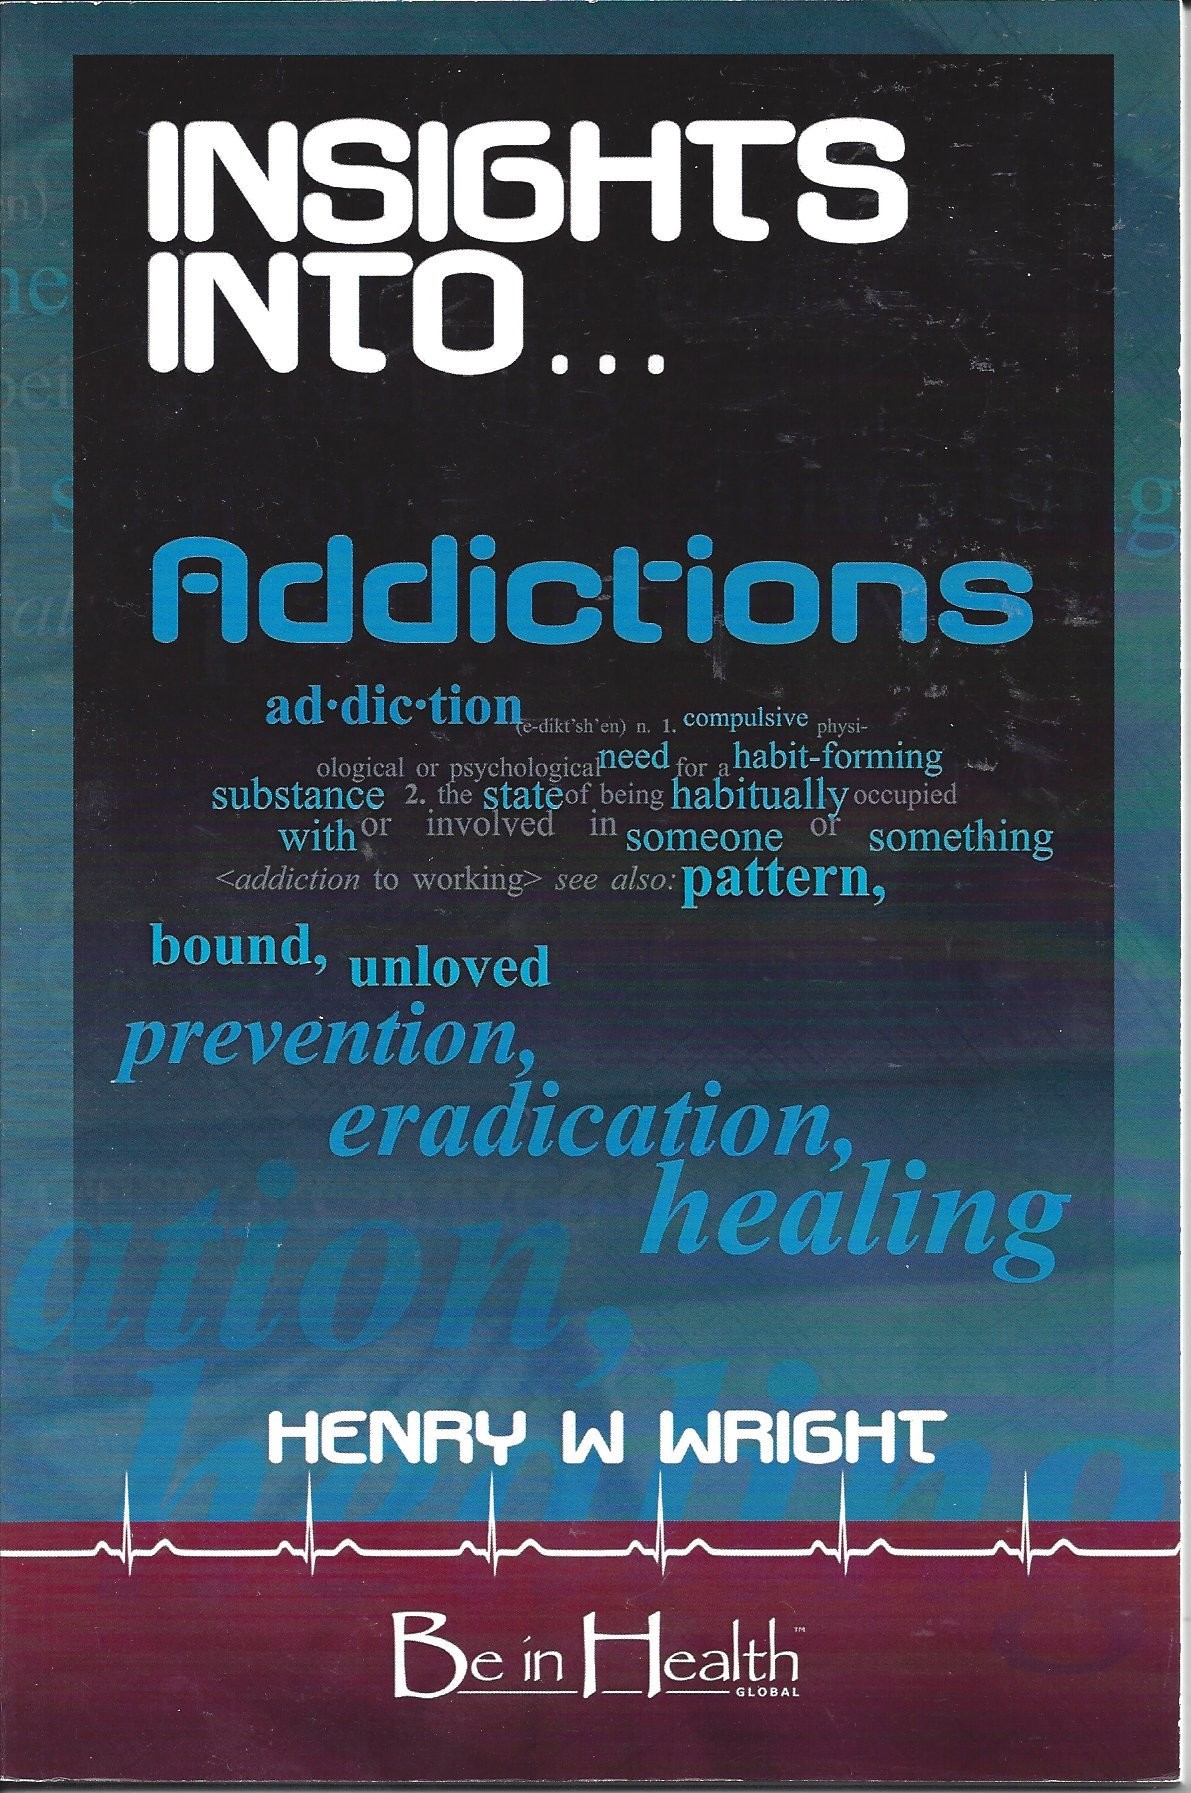 Insights Into...Addictions  (2007)  Front